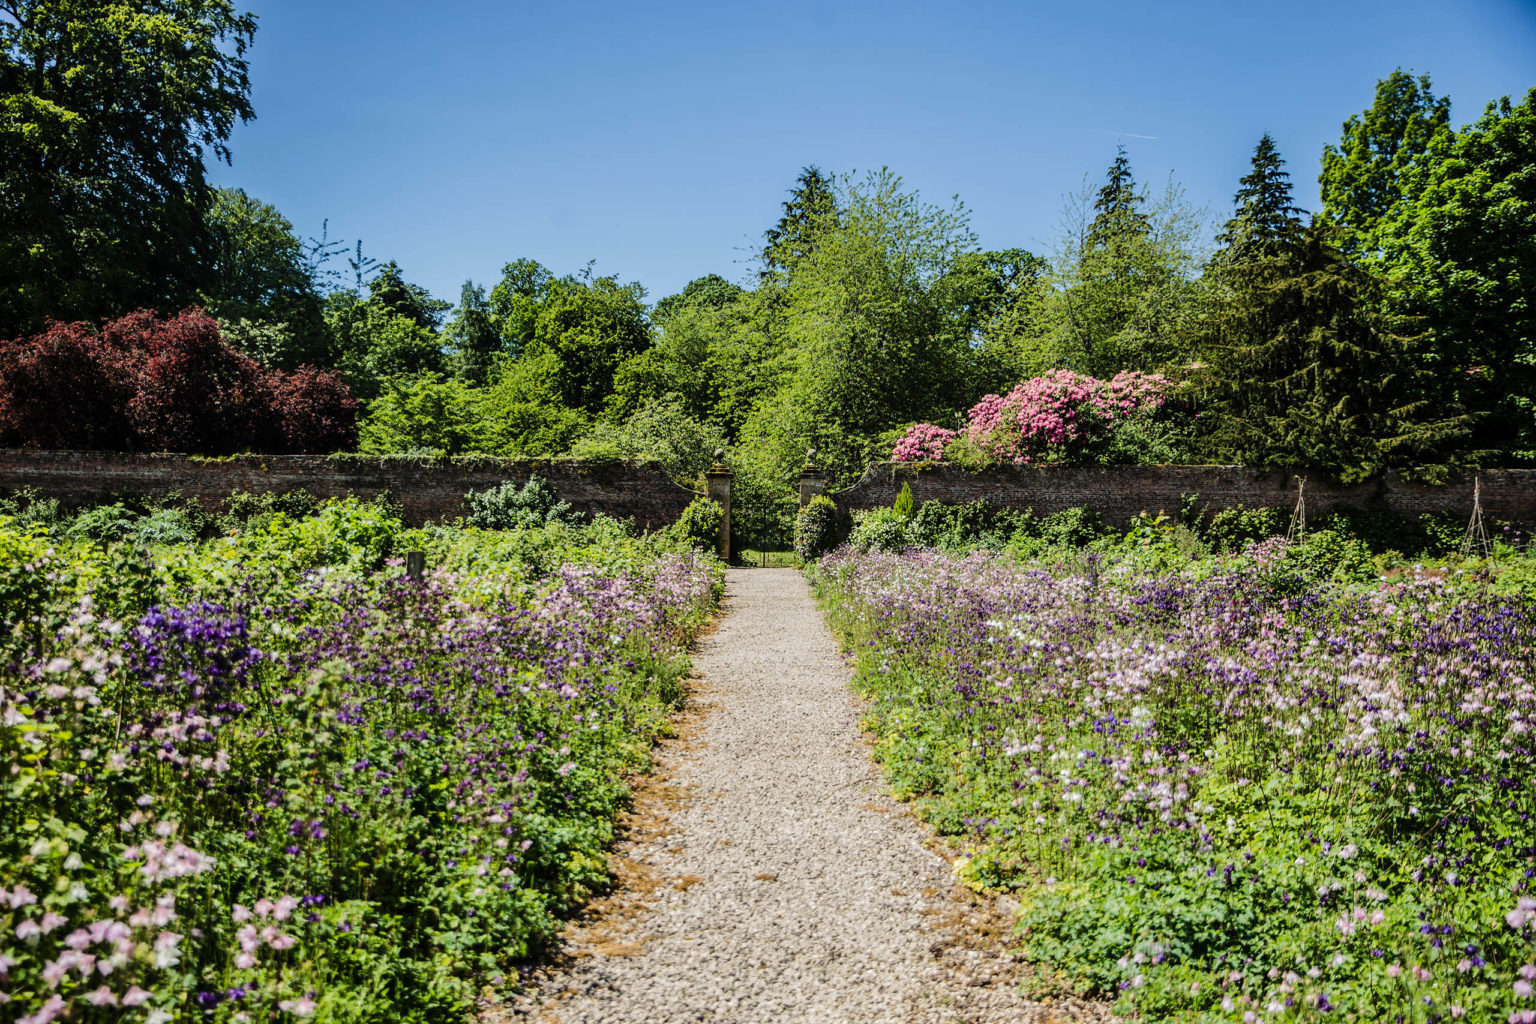 A gravel path leading through flowers and trees at Swinton Park's walled garden on the Swinton Estate in North Yorkshrie